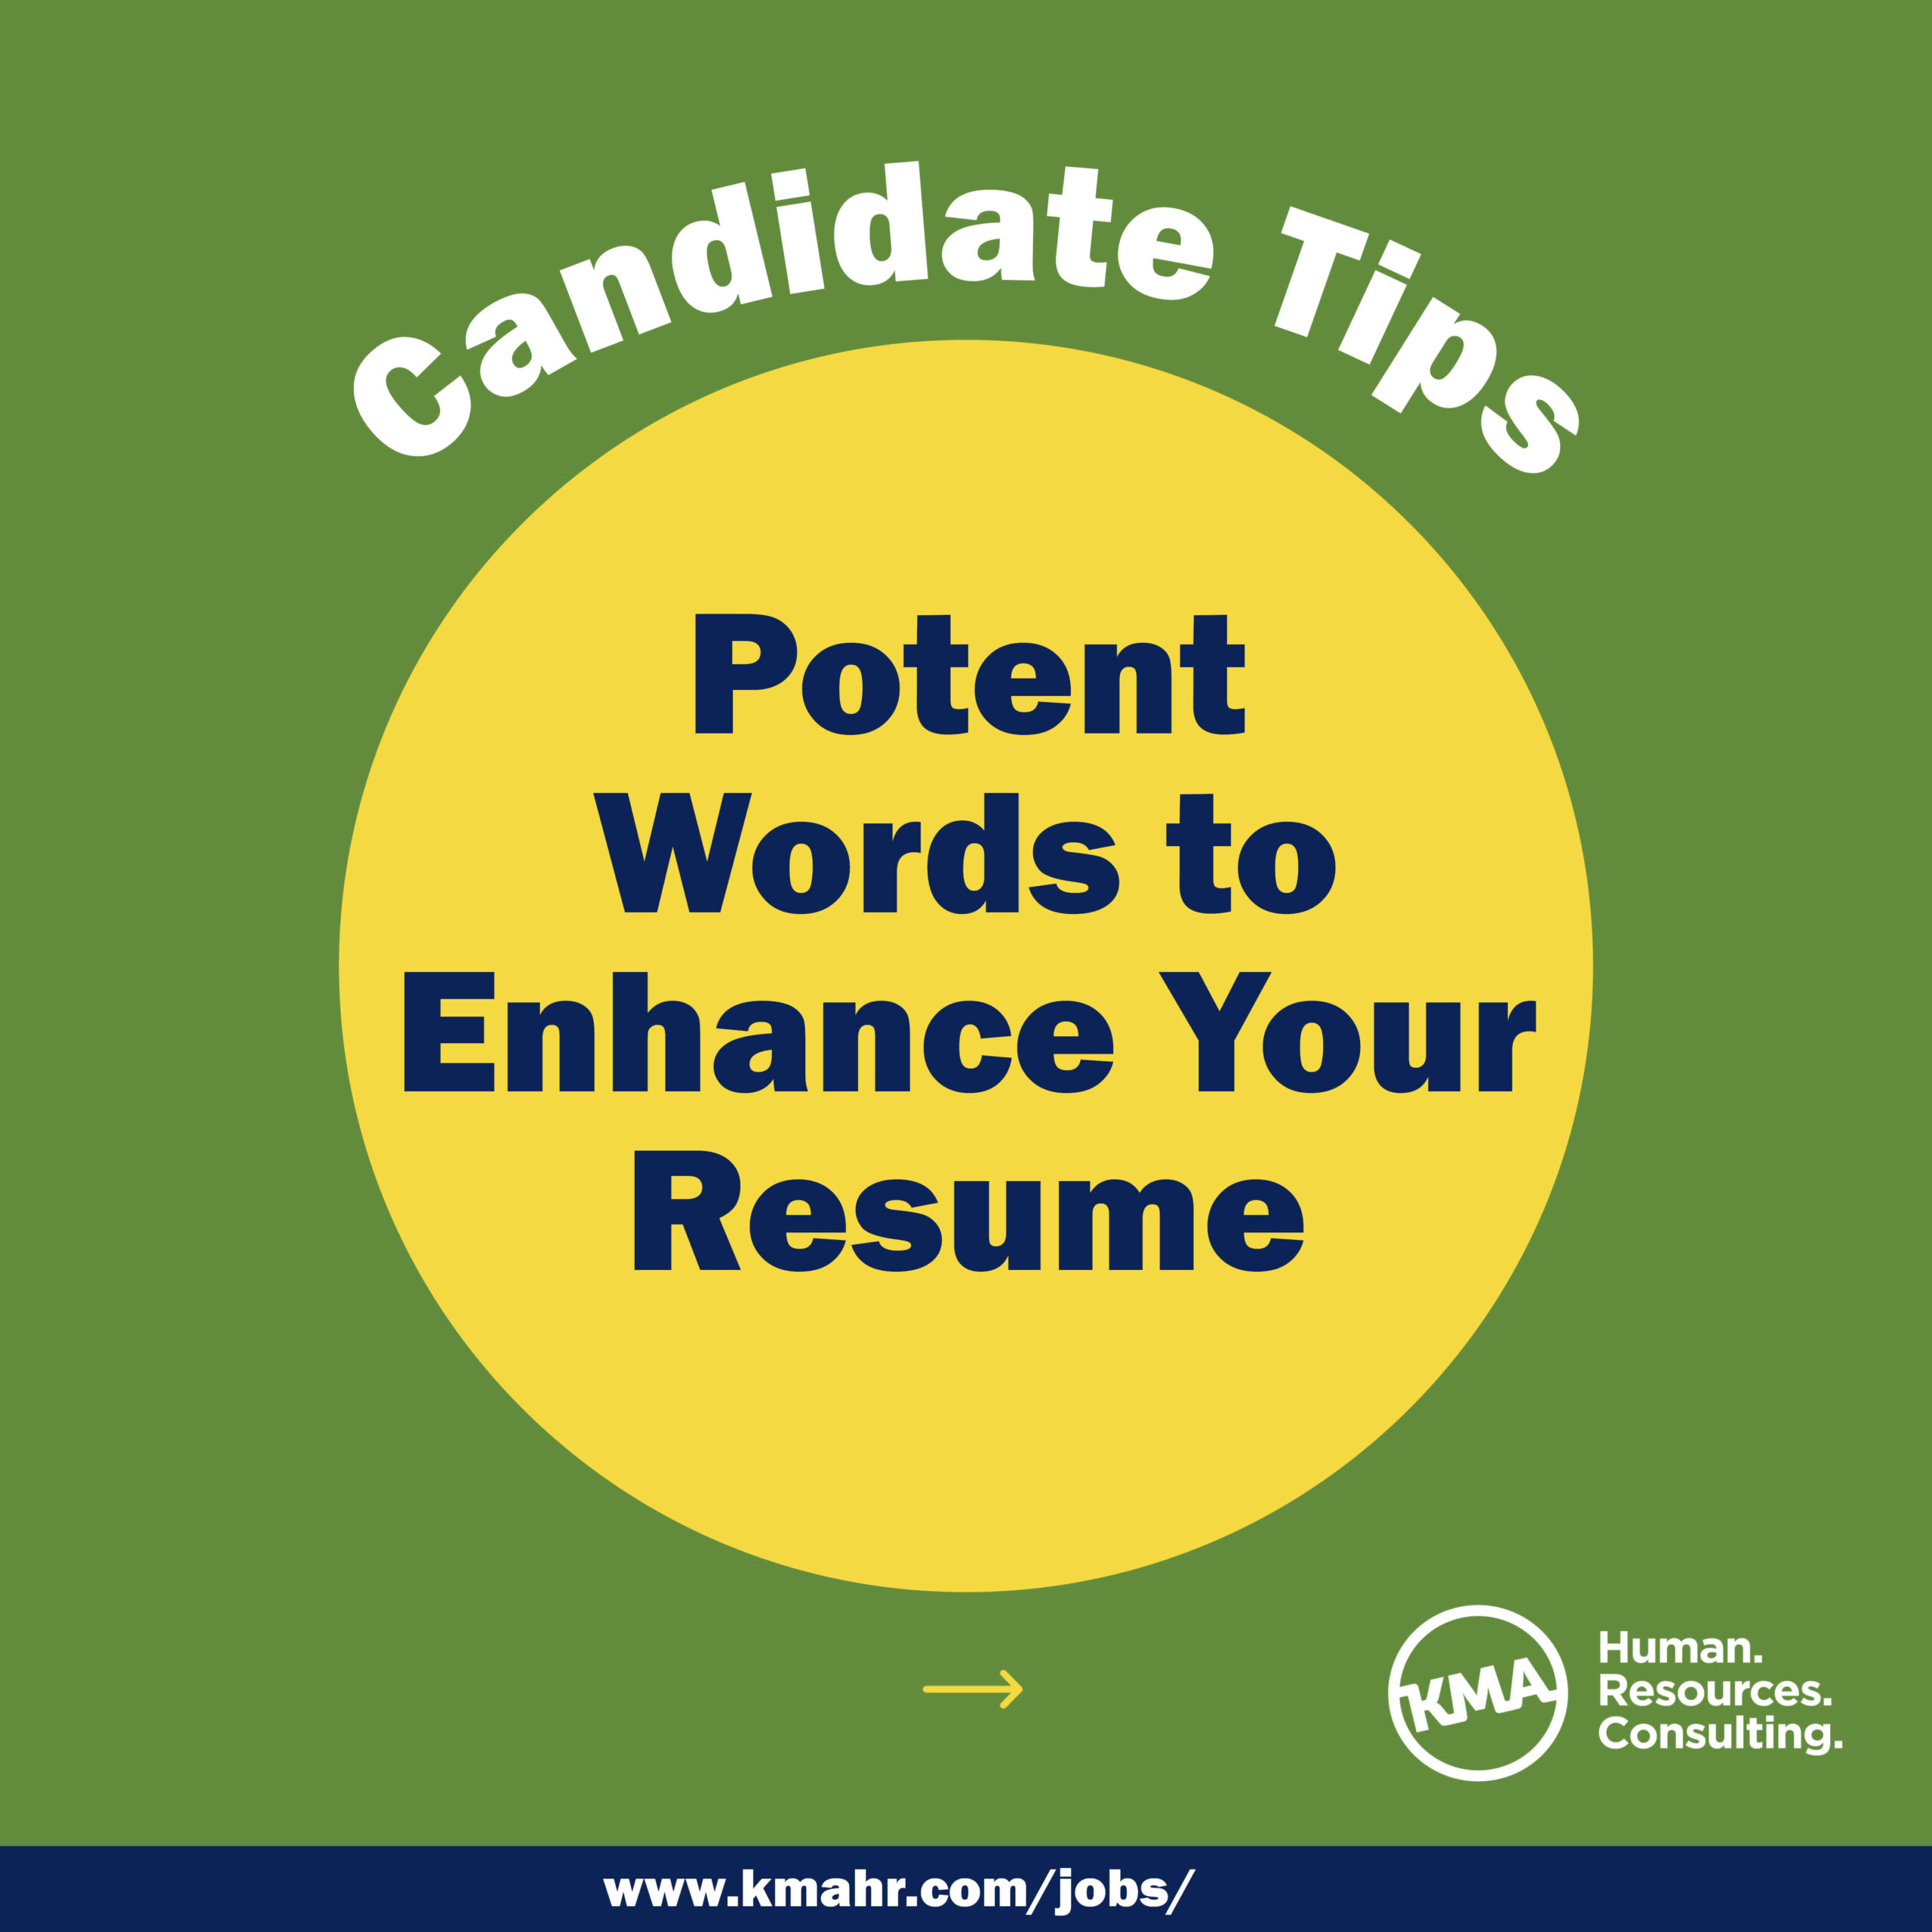 Candidate Tips 10.28